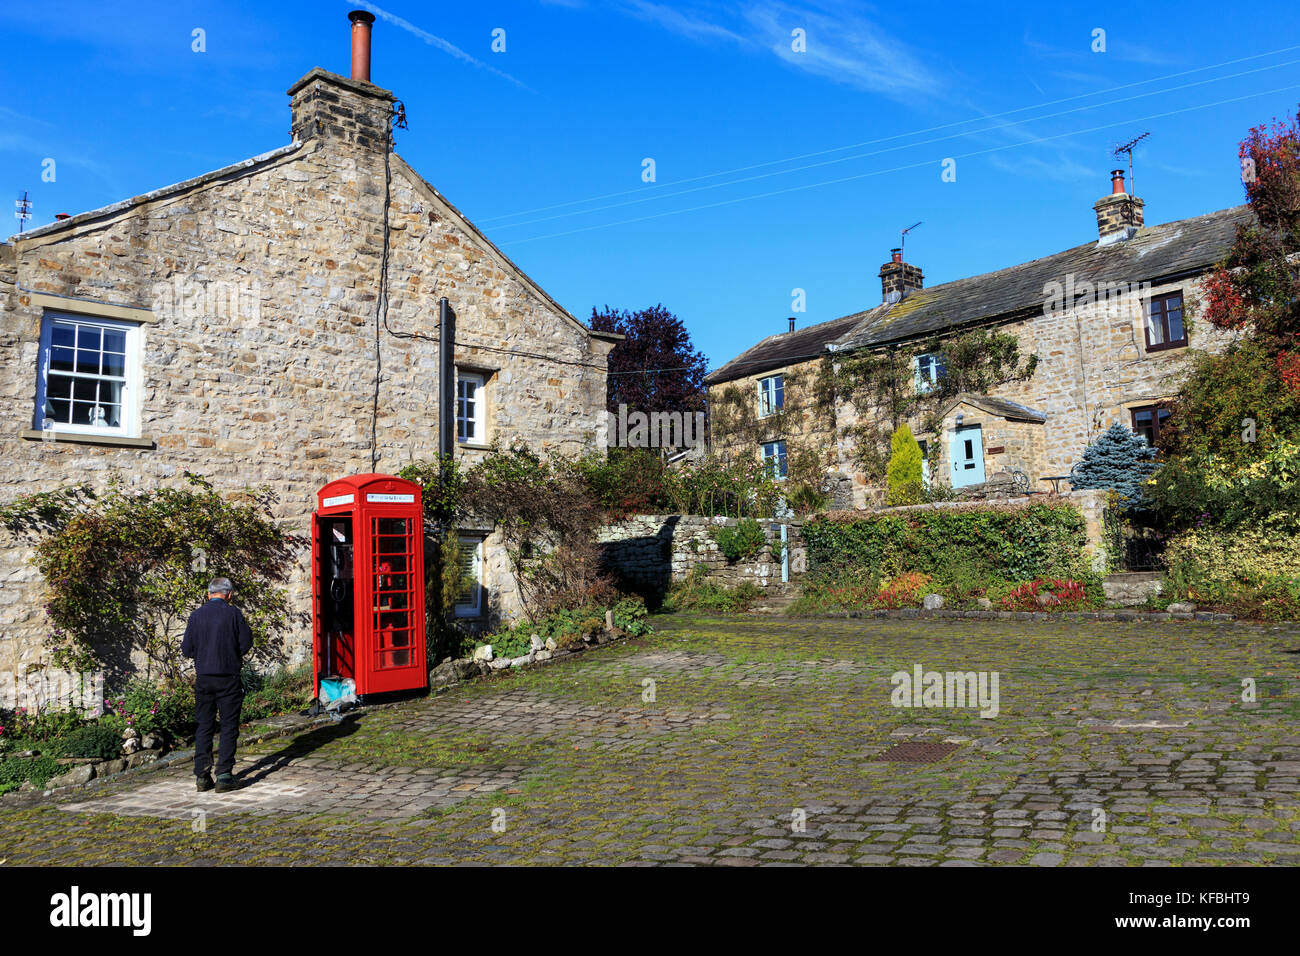 Stone built houses in the village of Healaugh Richmond a man by a traditional red British Telephone box NorthYorkshire England Stock Photo